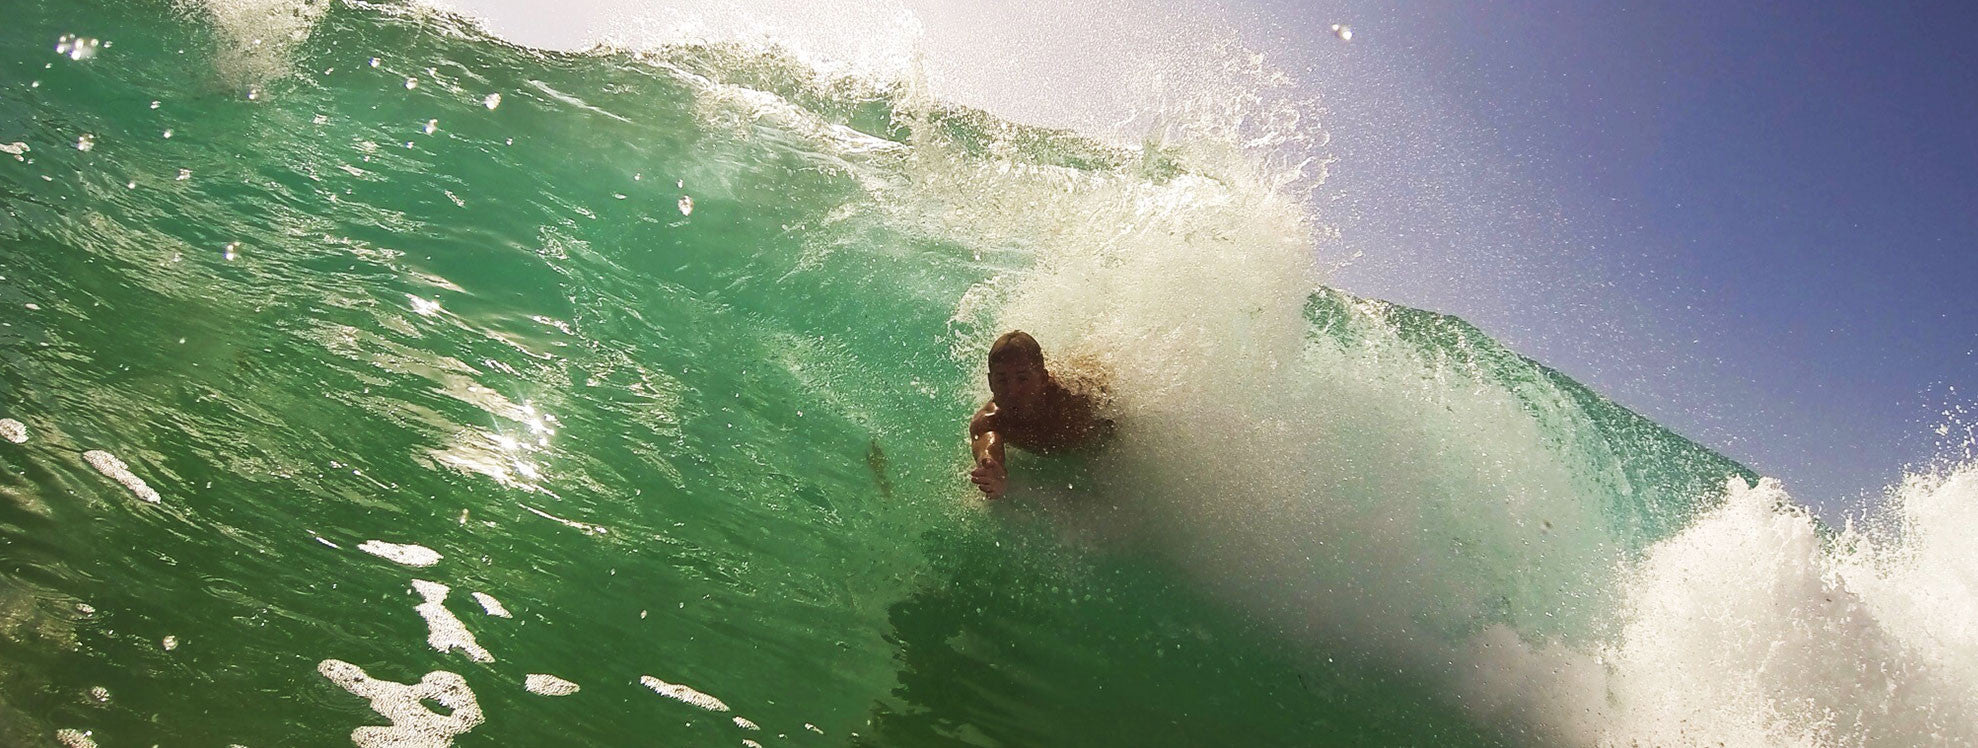 A Back Breaking Moment at The Wedge with a Slyde Team Rider